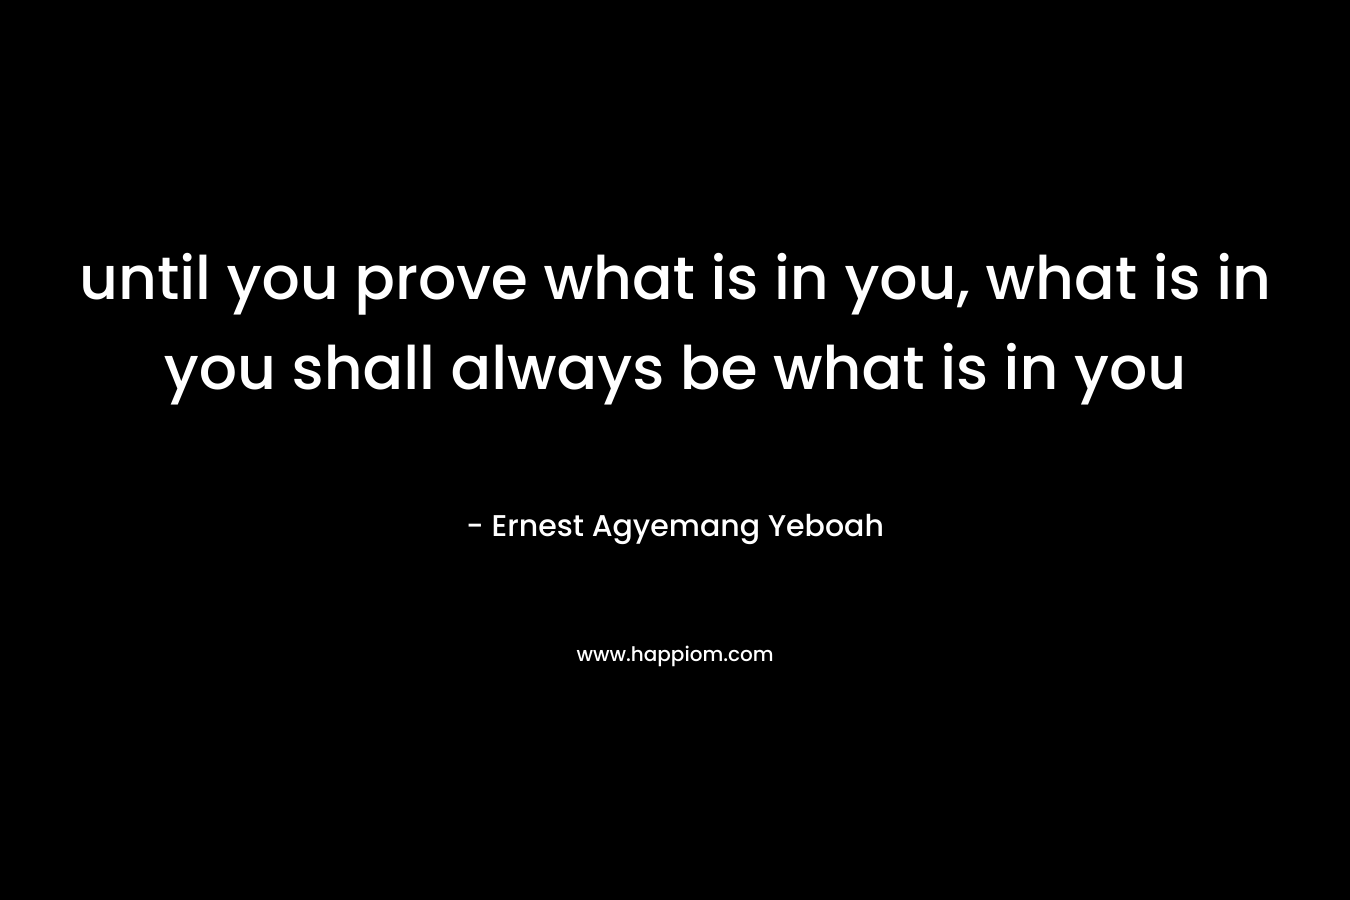 until you prove what is in you, what is in you shall always be what is in you